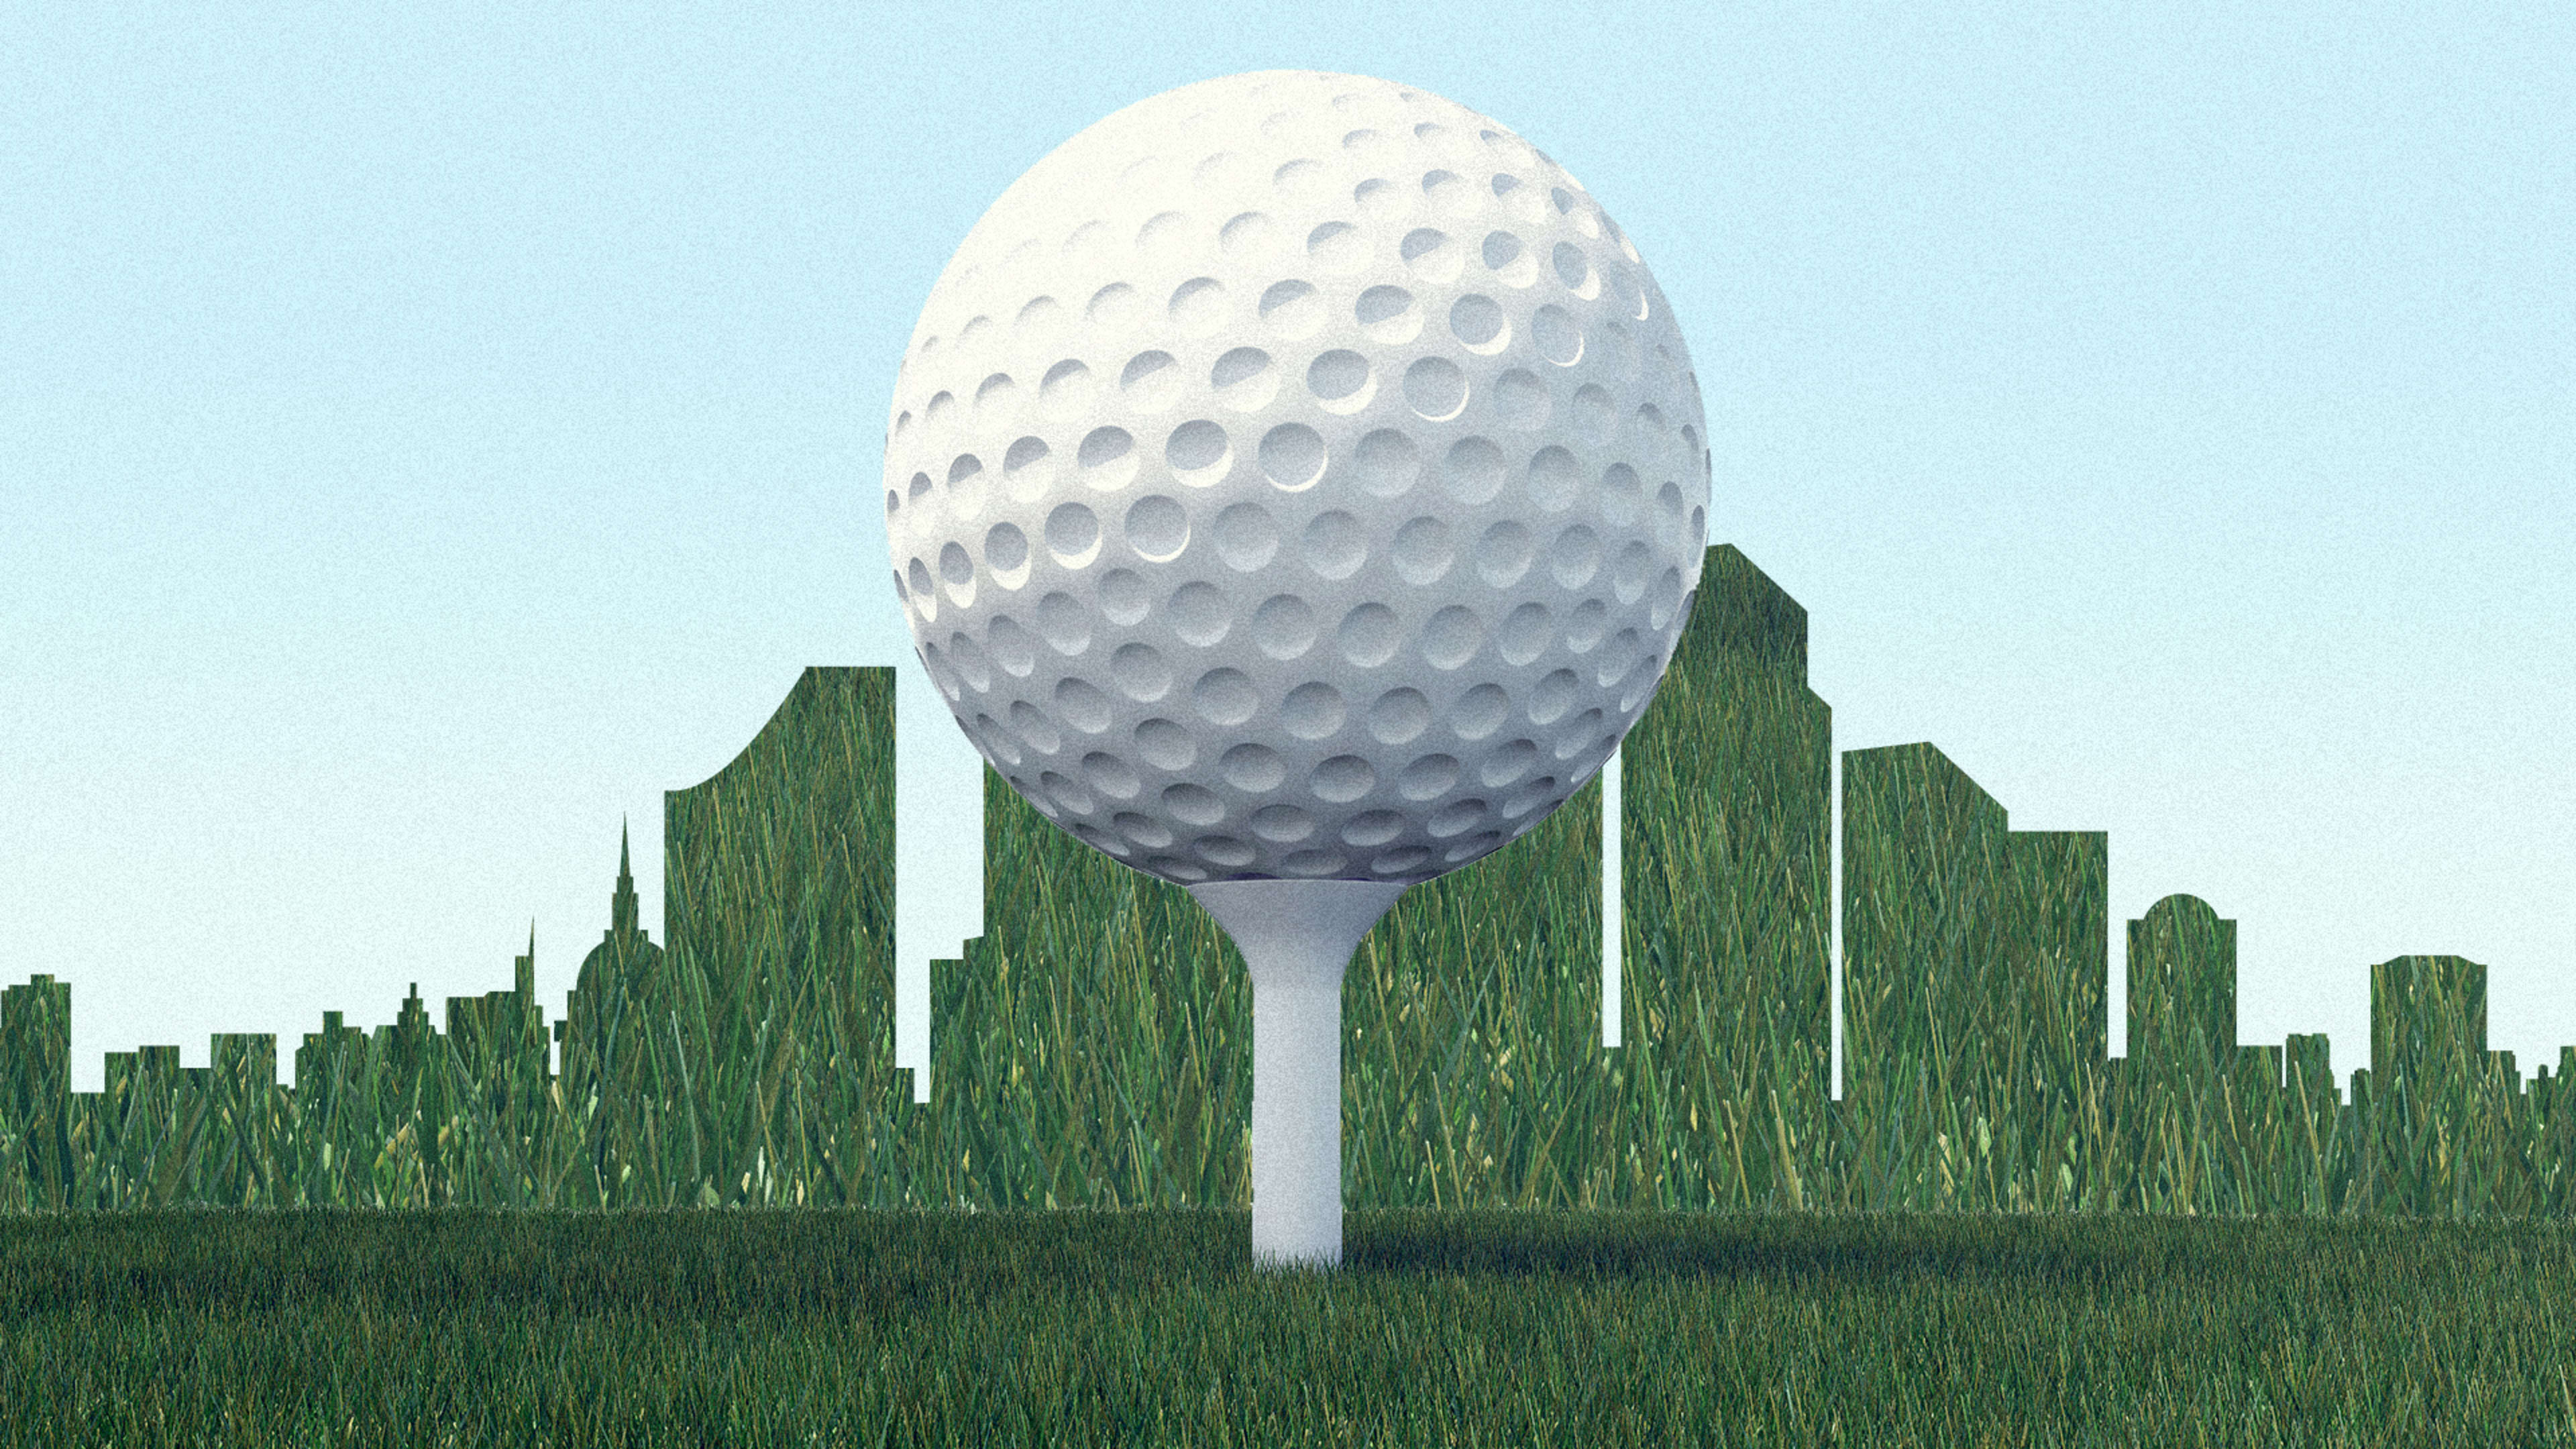 Need land for parks and housing? There are plenty of useless golf courses to repurpose